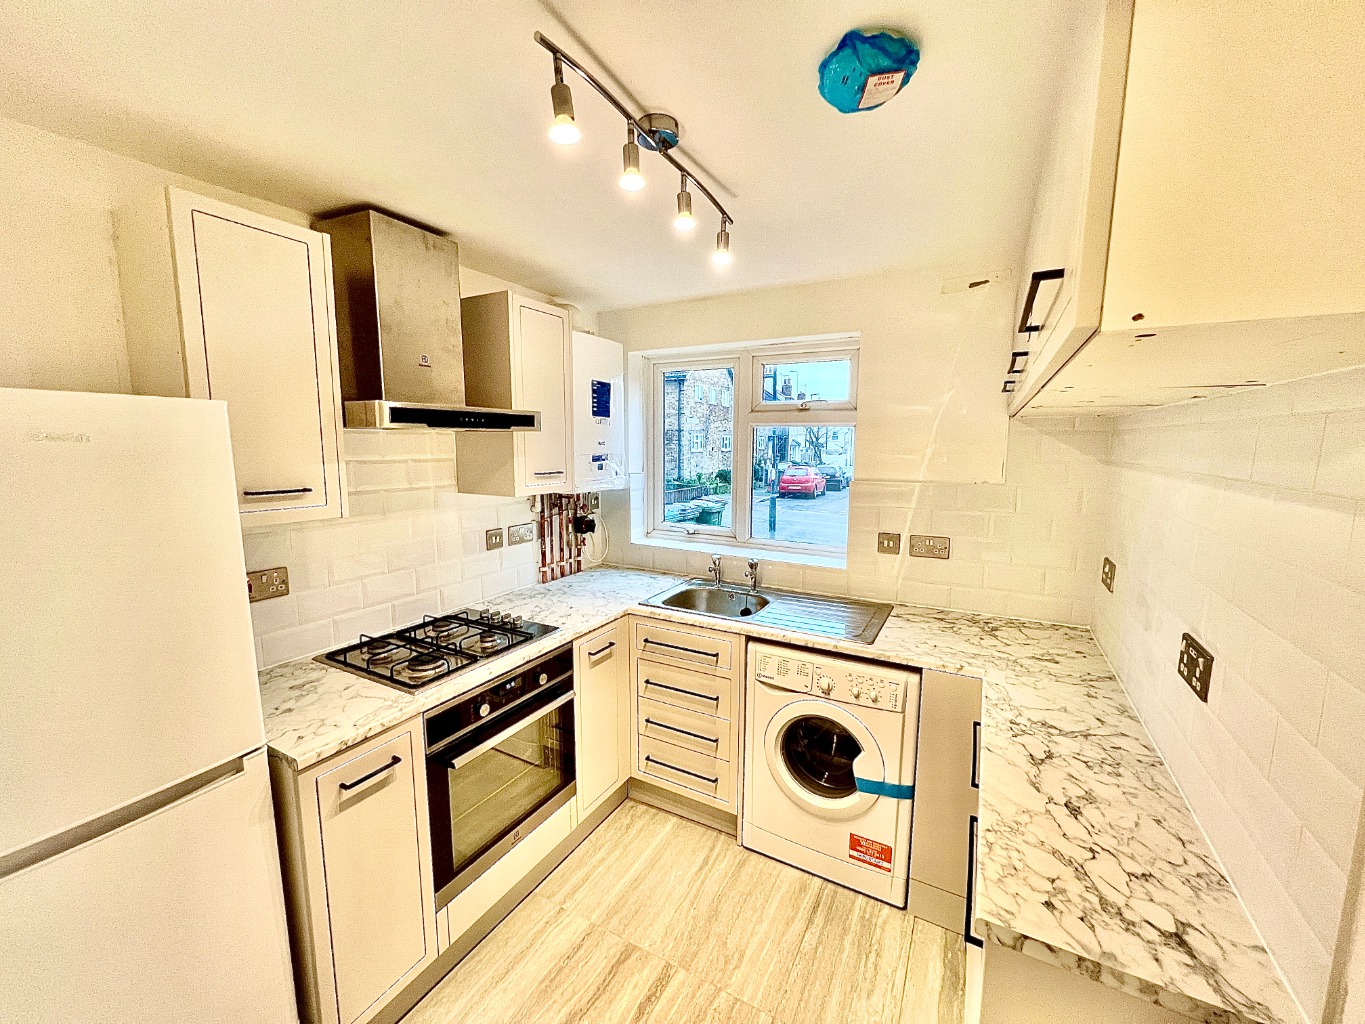 Beaumont Gibbs are offering this extensively renovated two bedroomed ground floor maisonette for rent. The property is situated in a popular and residential location in Plumstead and is available for immediate occupancy.